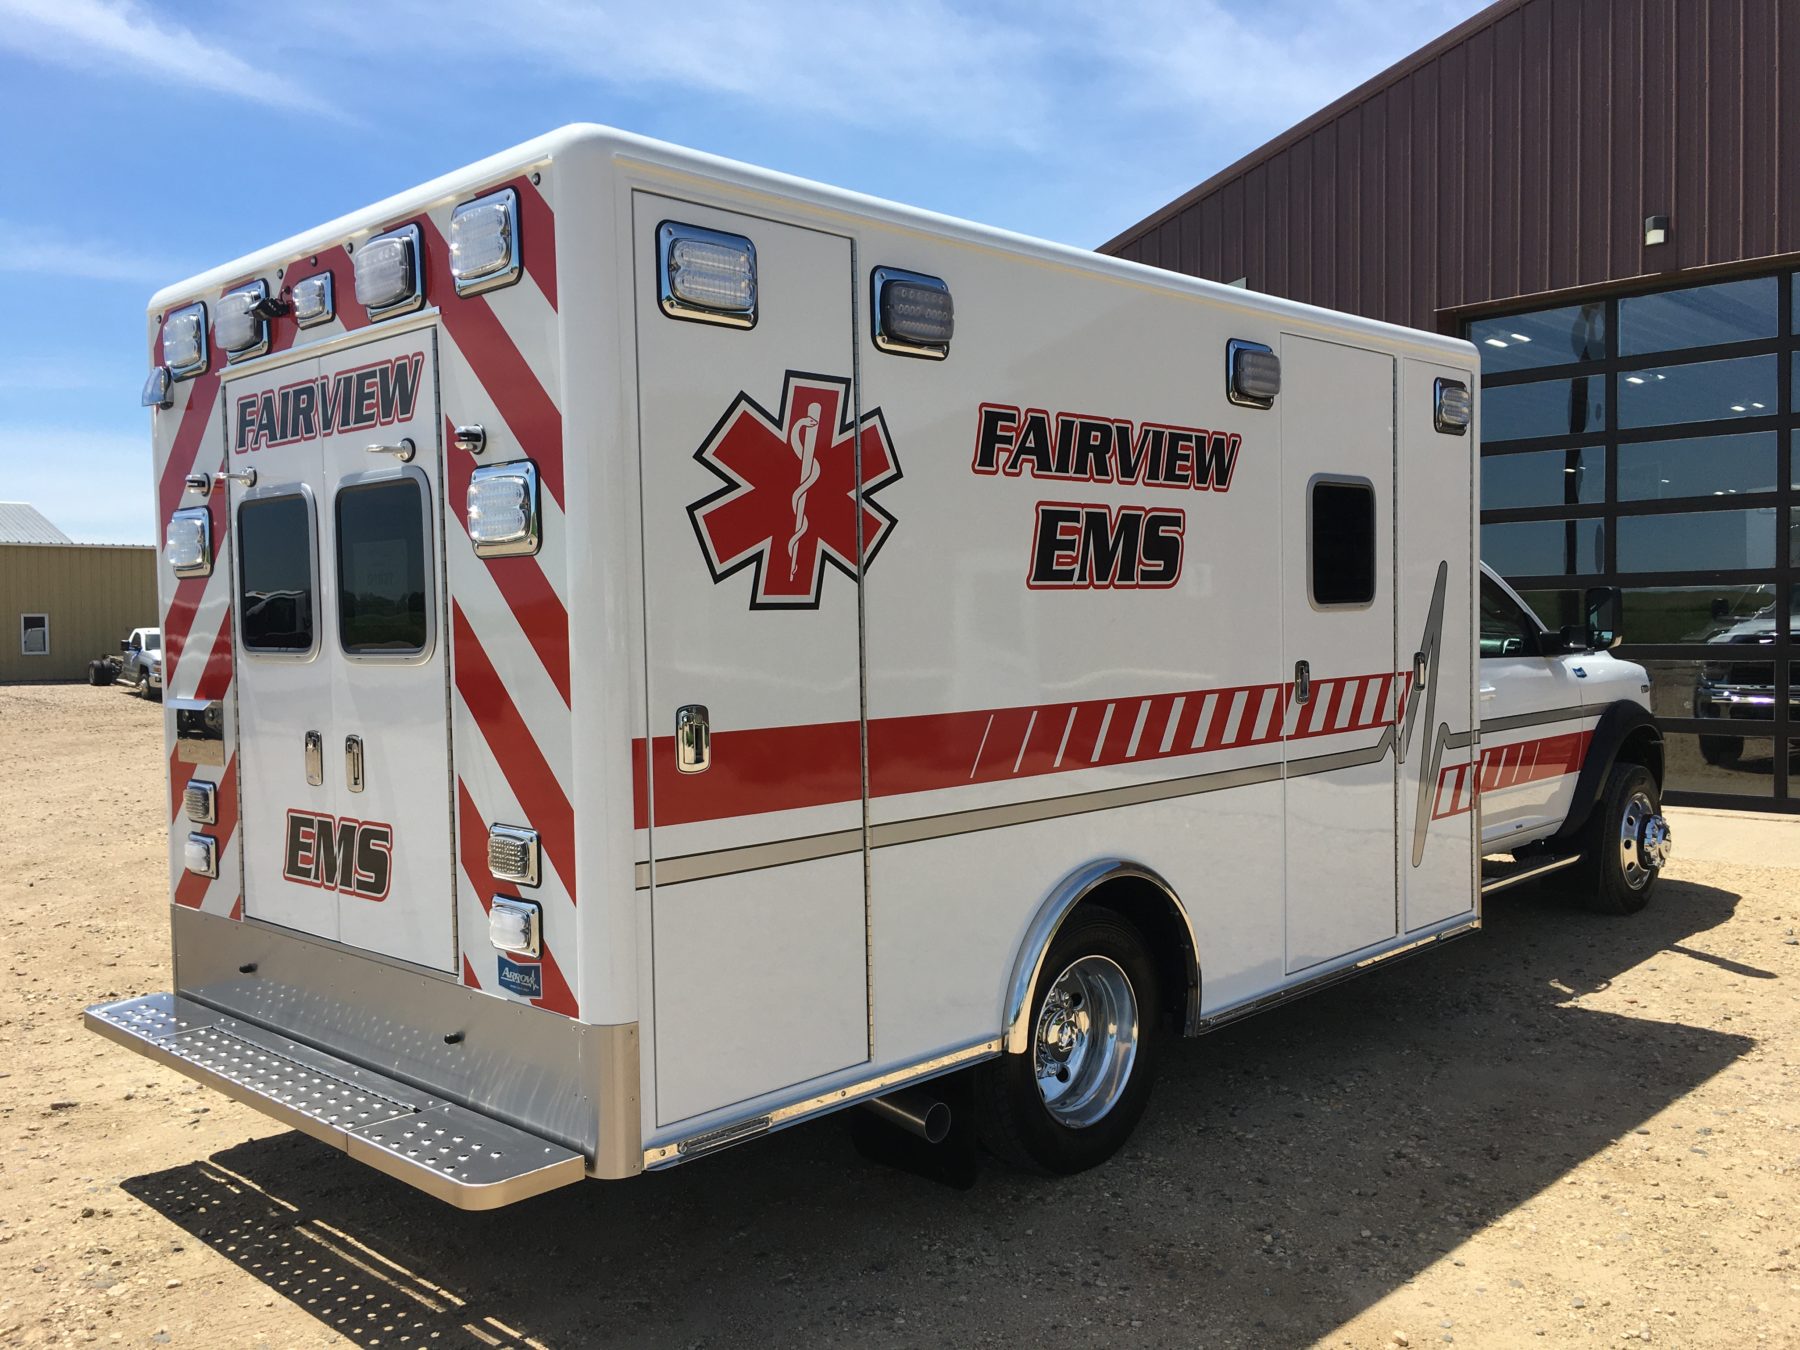 2021 Ram 5500 4x4 Heavy Duty Ambulance For Sale – Picture 6